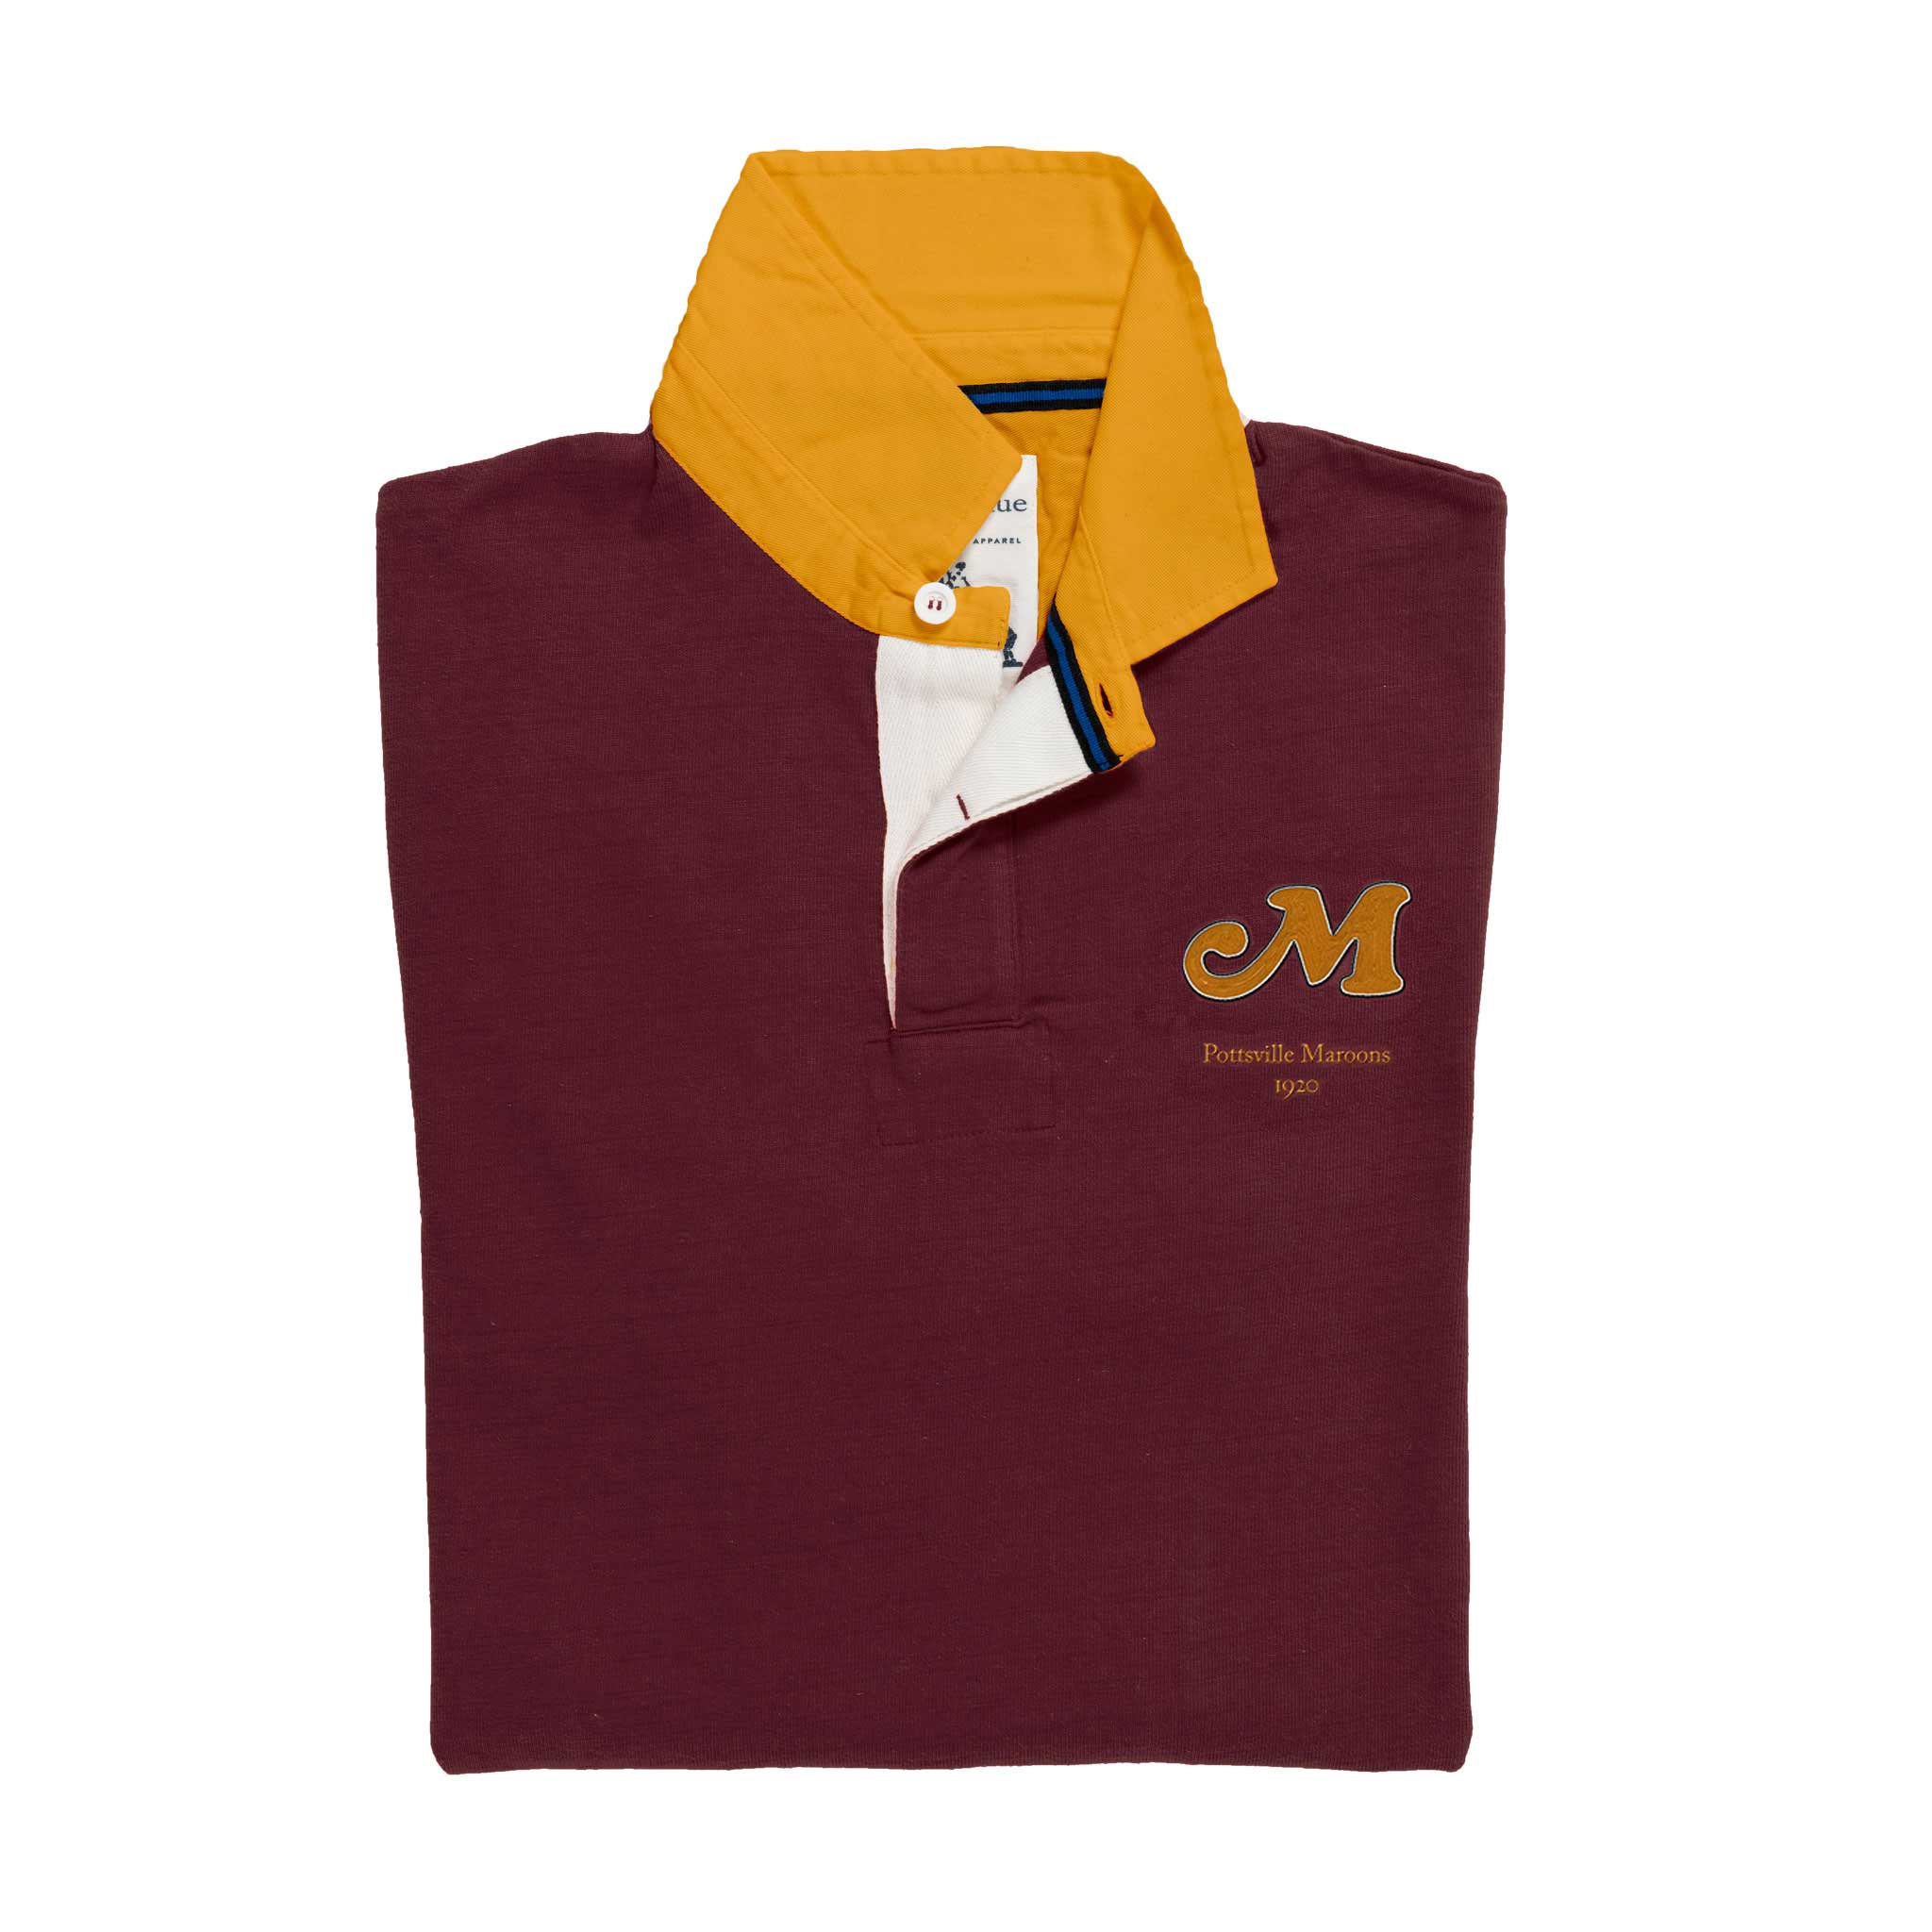 Pottsville Maroons Rugby Shirt_Folded